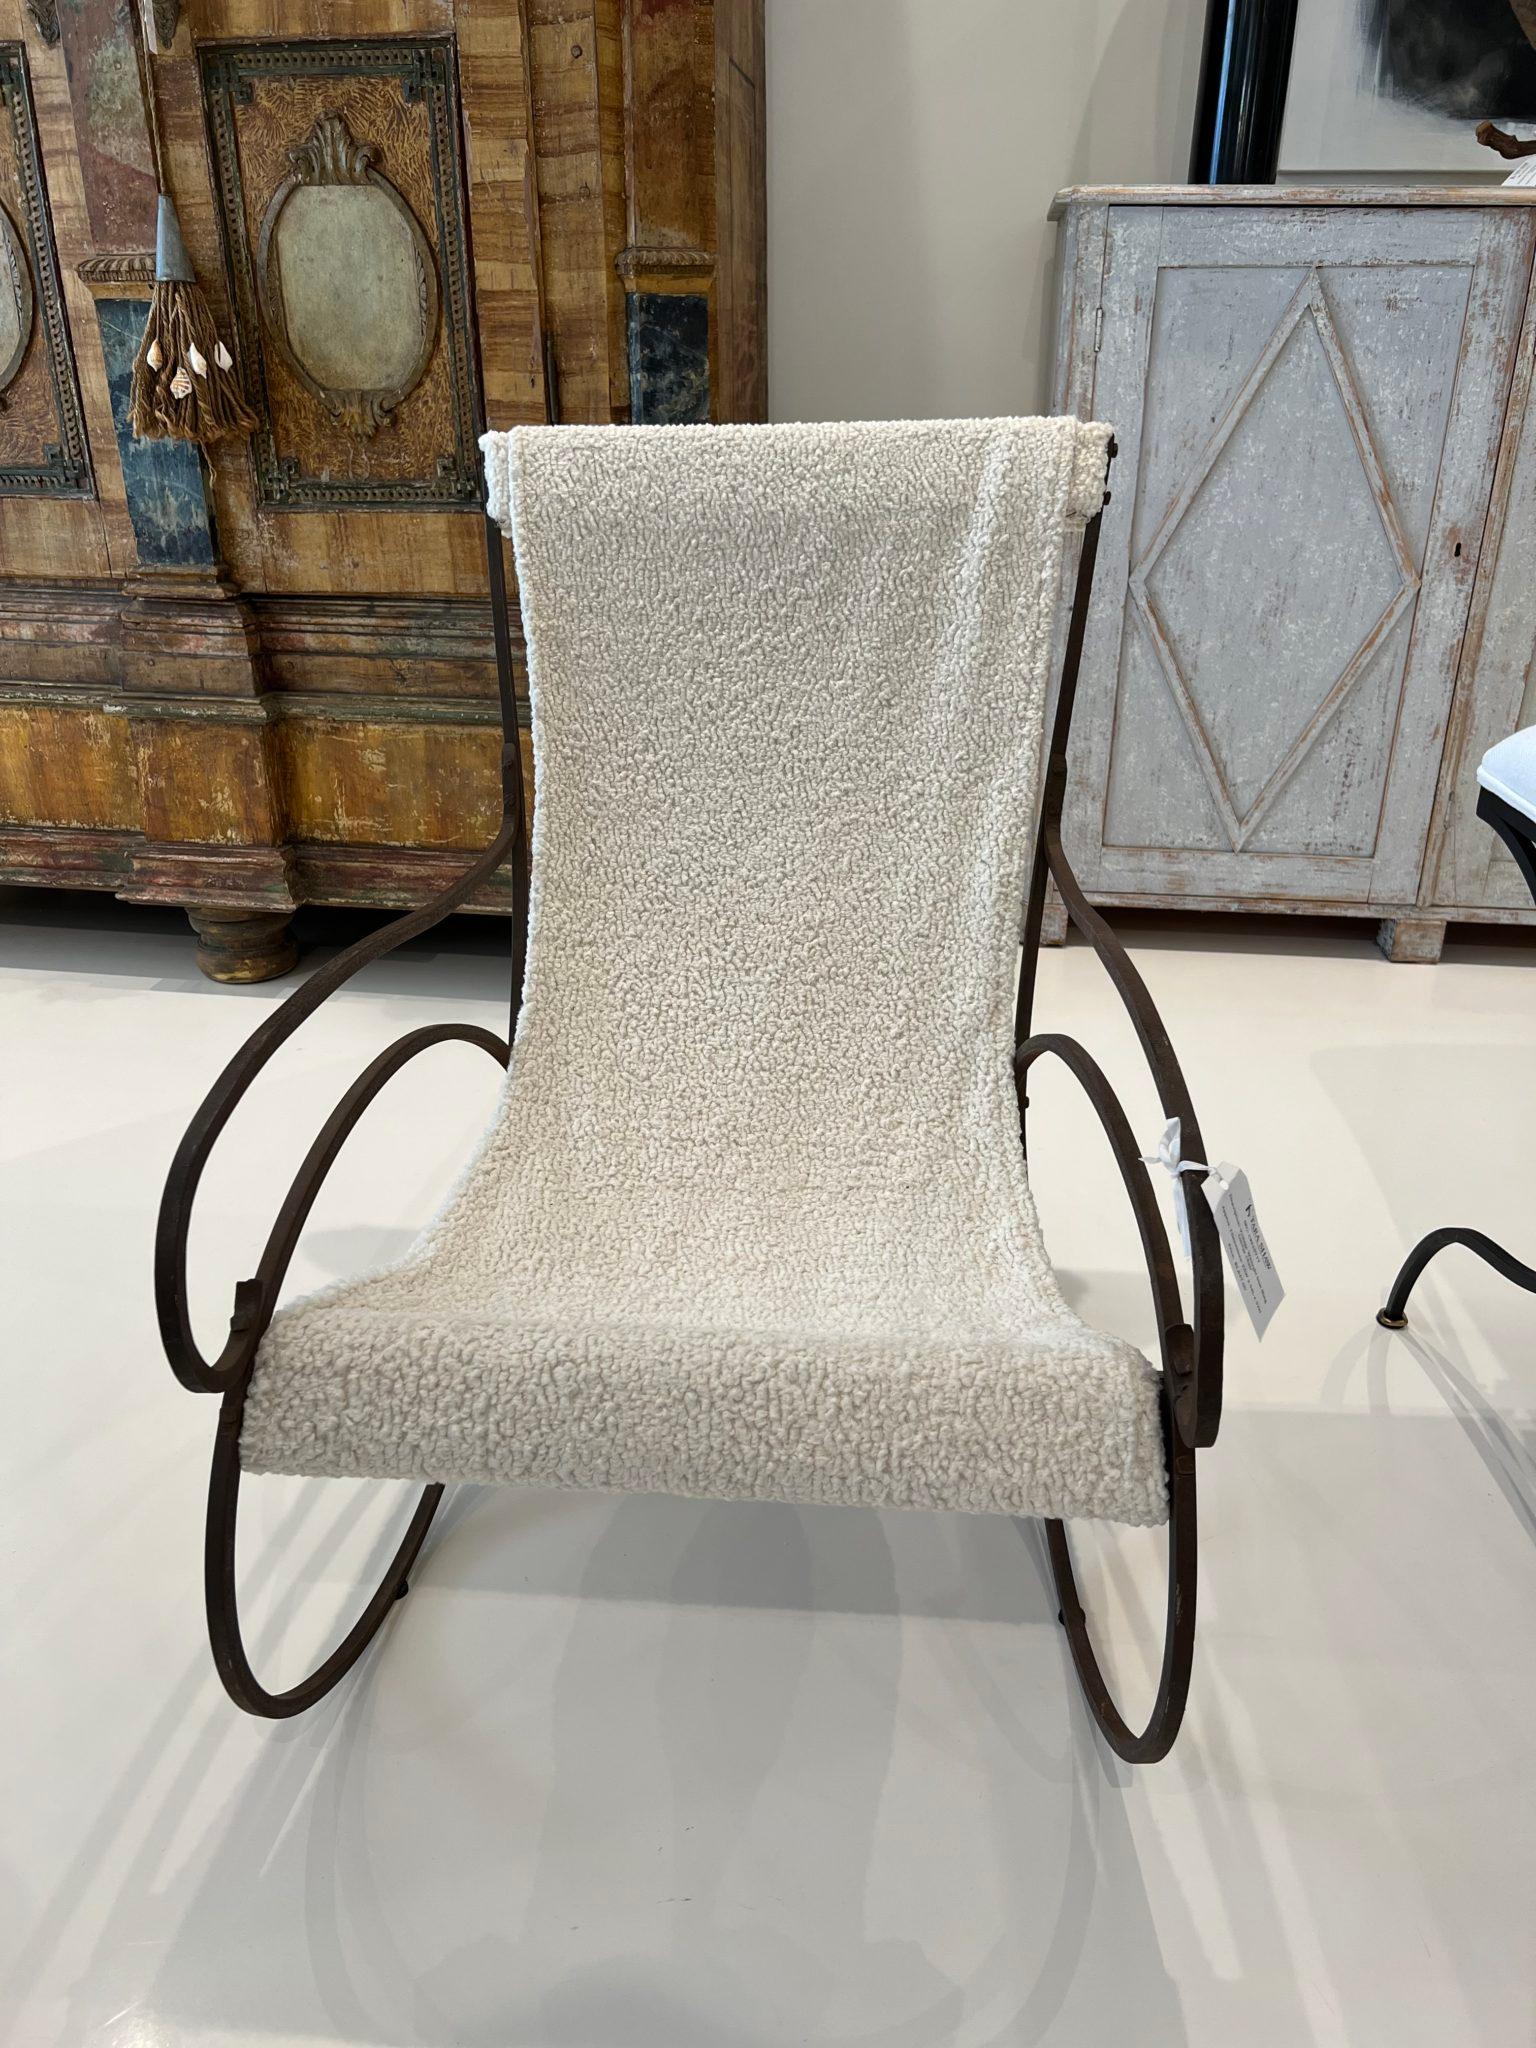 Smooth clean lines with a mid-century vibe, this whimsical wrought iron chair has been newly recovered in a soft cream boucle. This chair has an airy quality that just seems to fit in anywhere no matter what the decor and is surprisingly comfortable